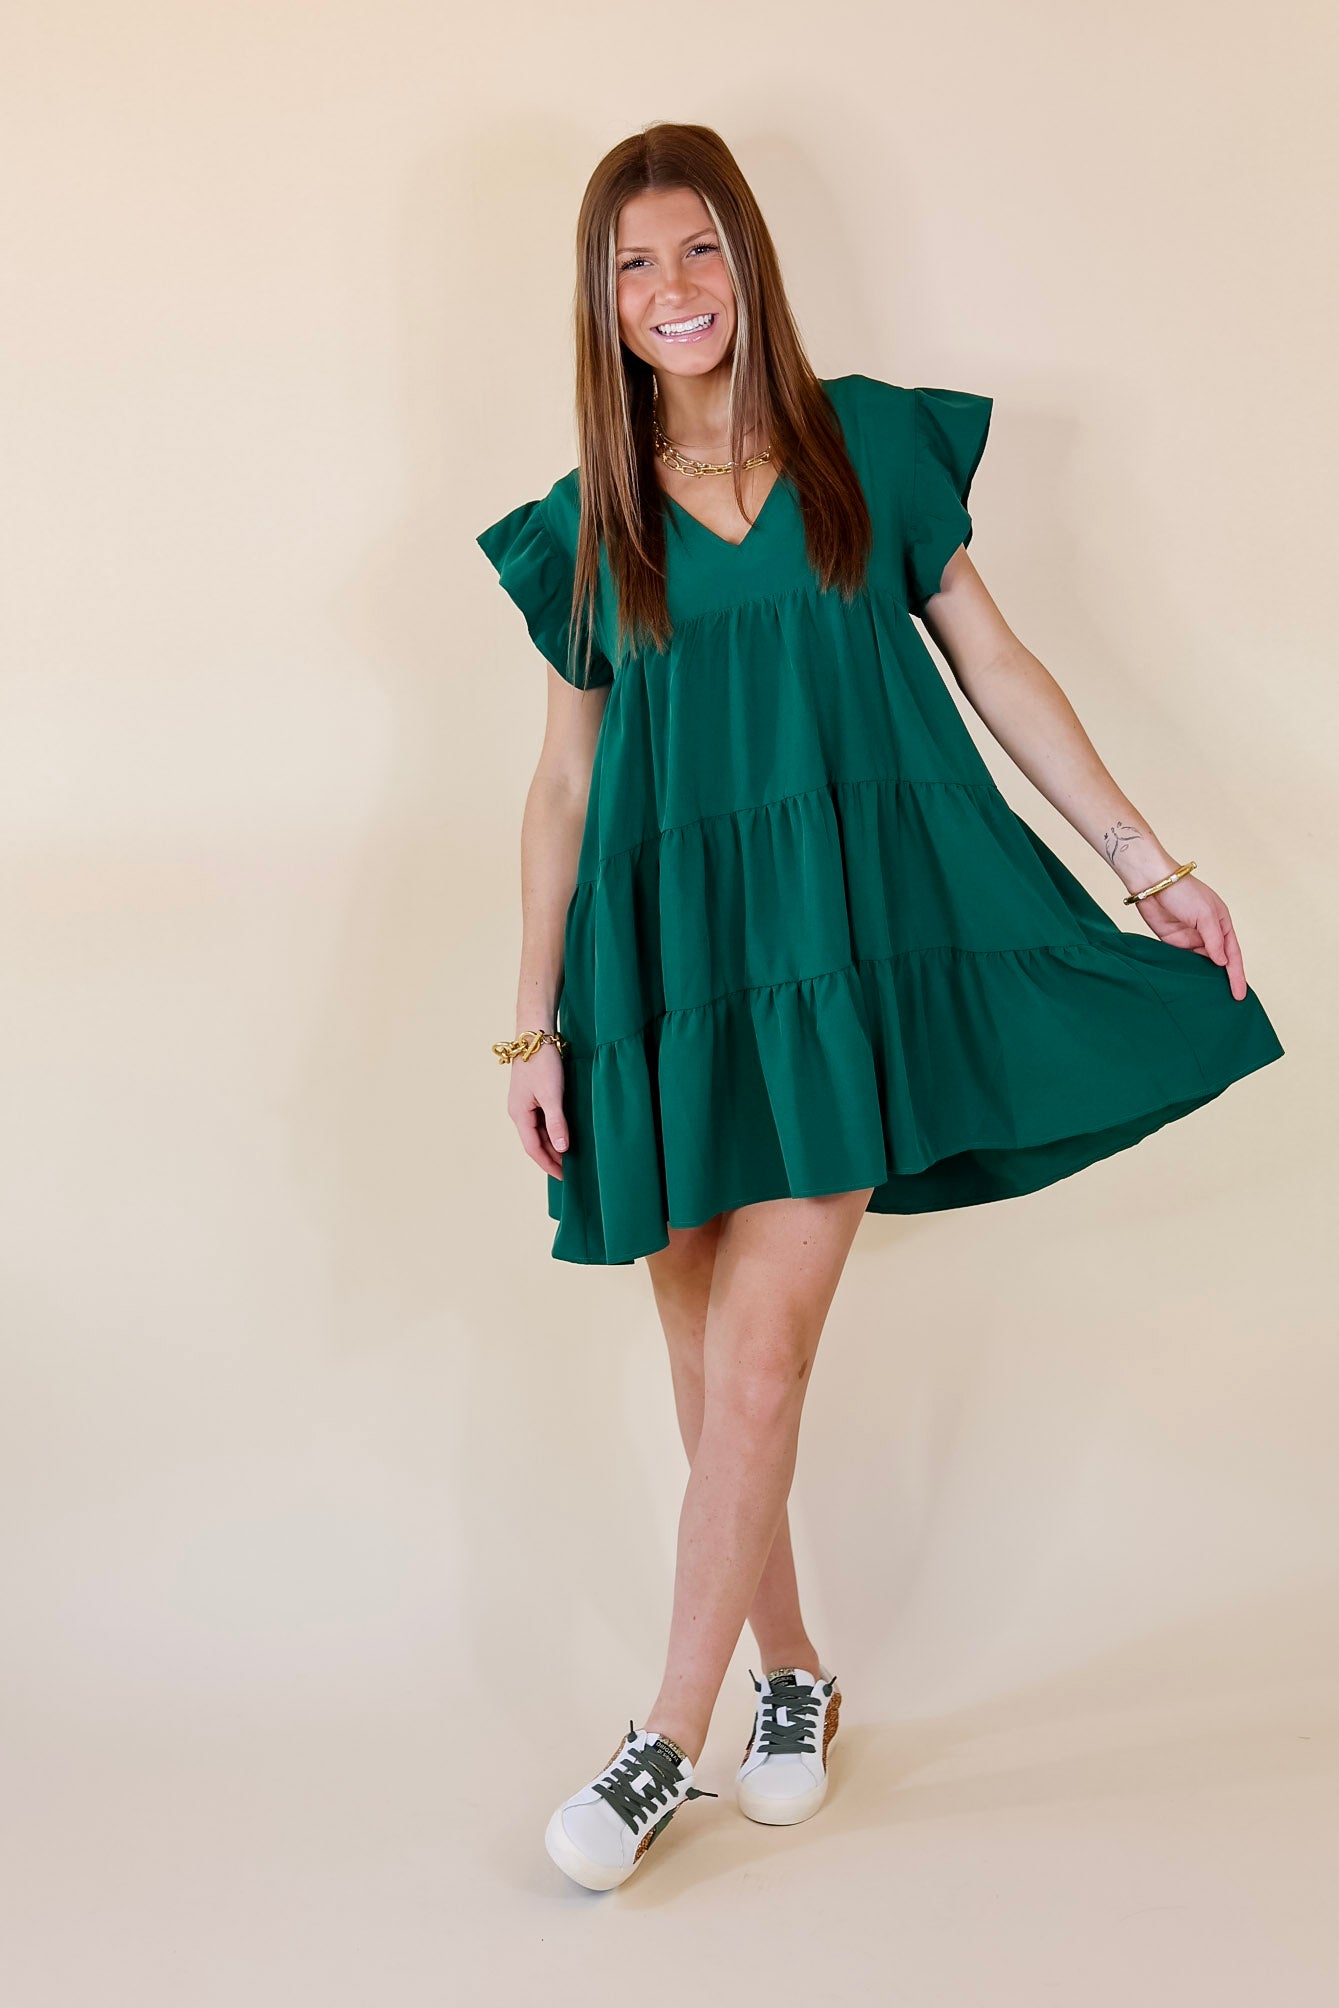 Delightful Endeavor Ruffle Cap Sleeve Tiered Dress in Hunter Green - Giddy Up Glamour Boutique